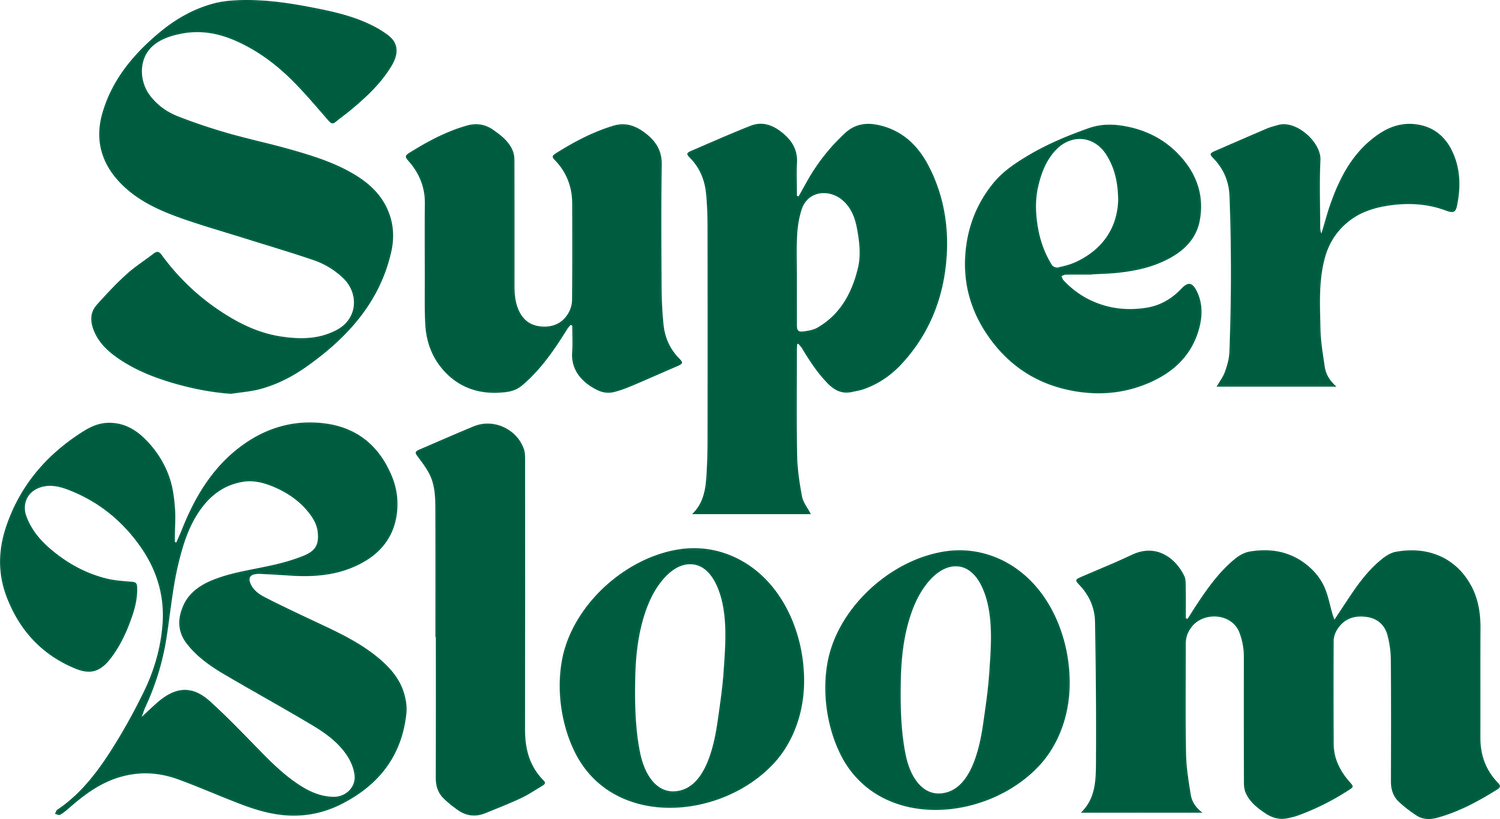 The Super Bloom